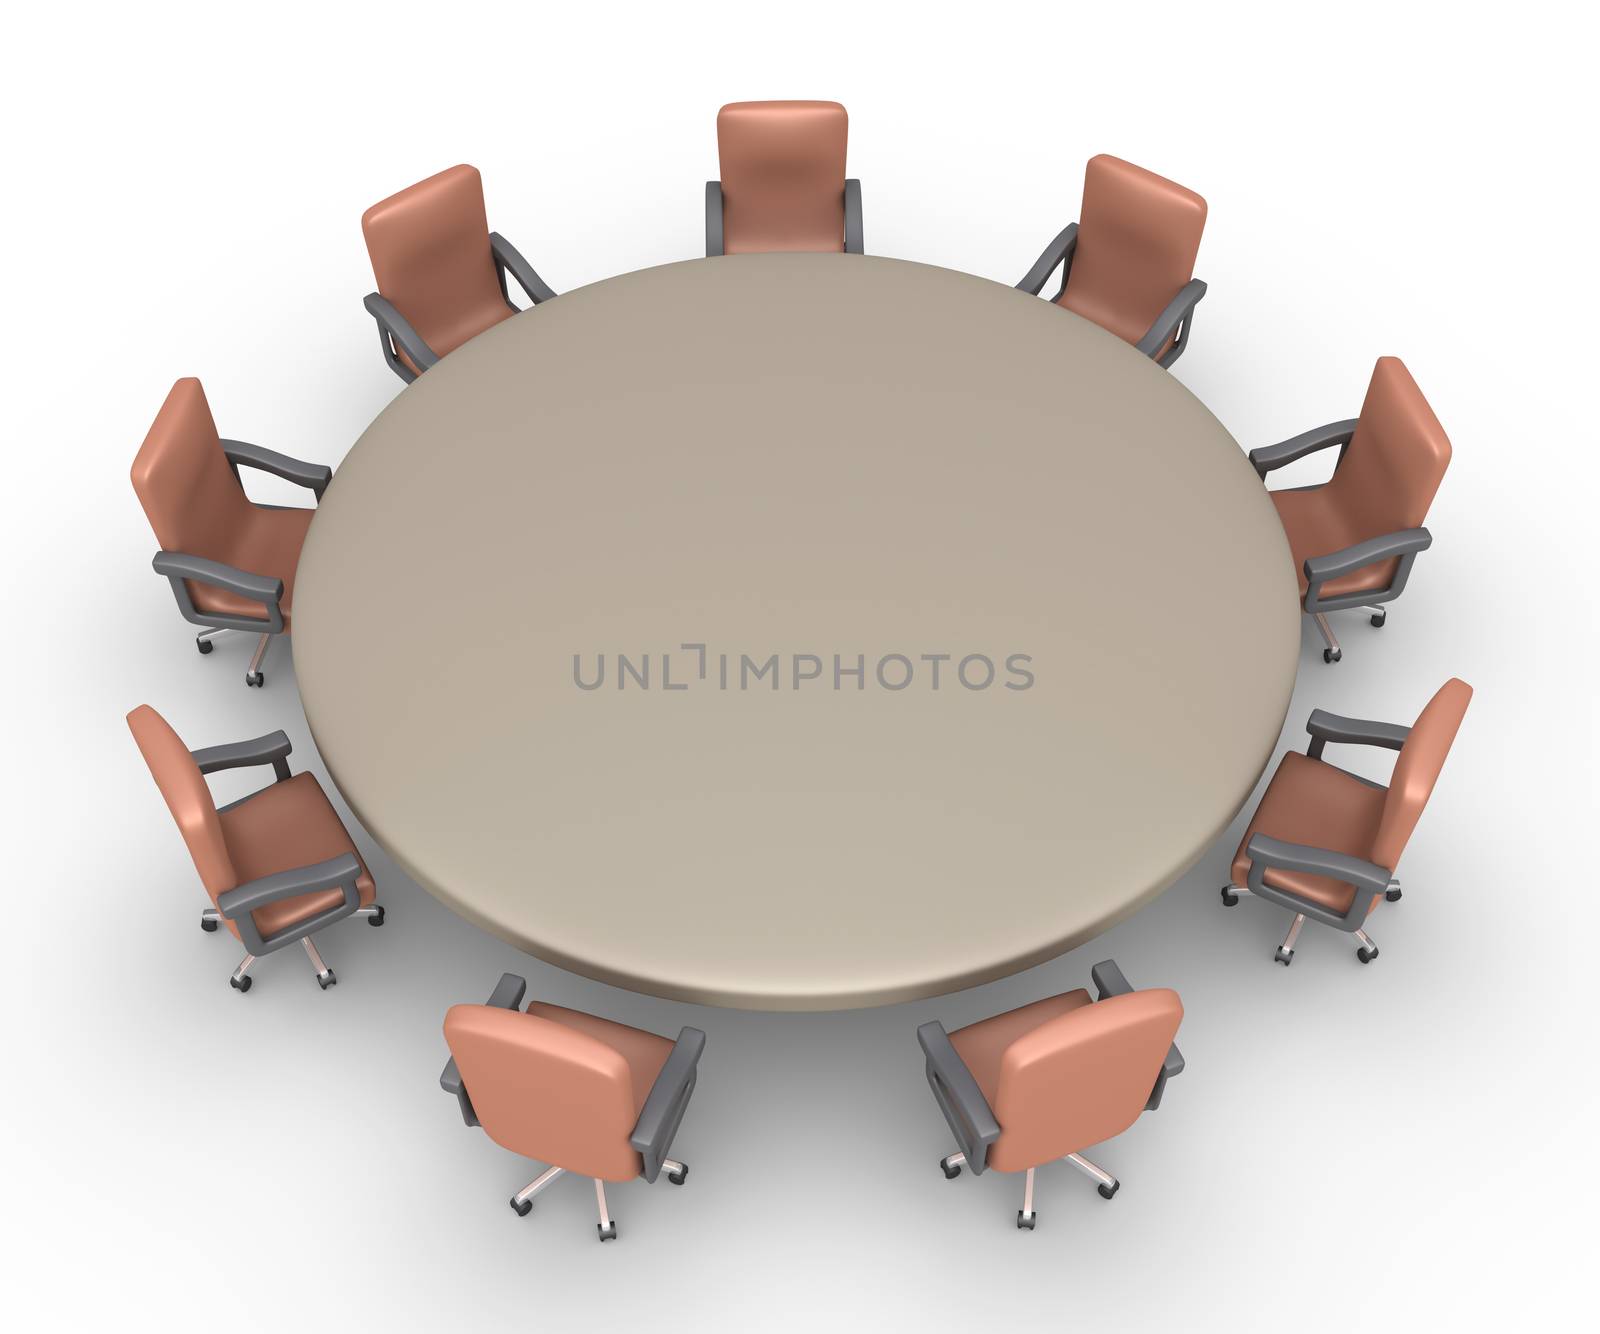 Armchairs are around a table as preparation for a business meeting